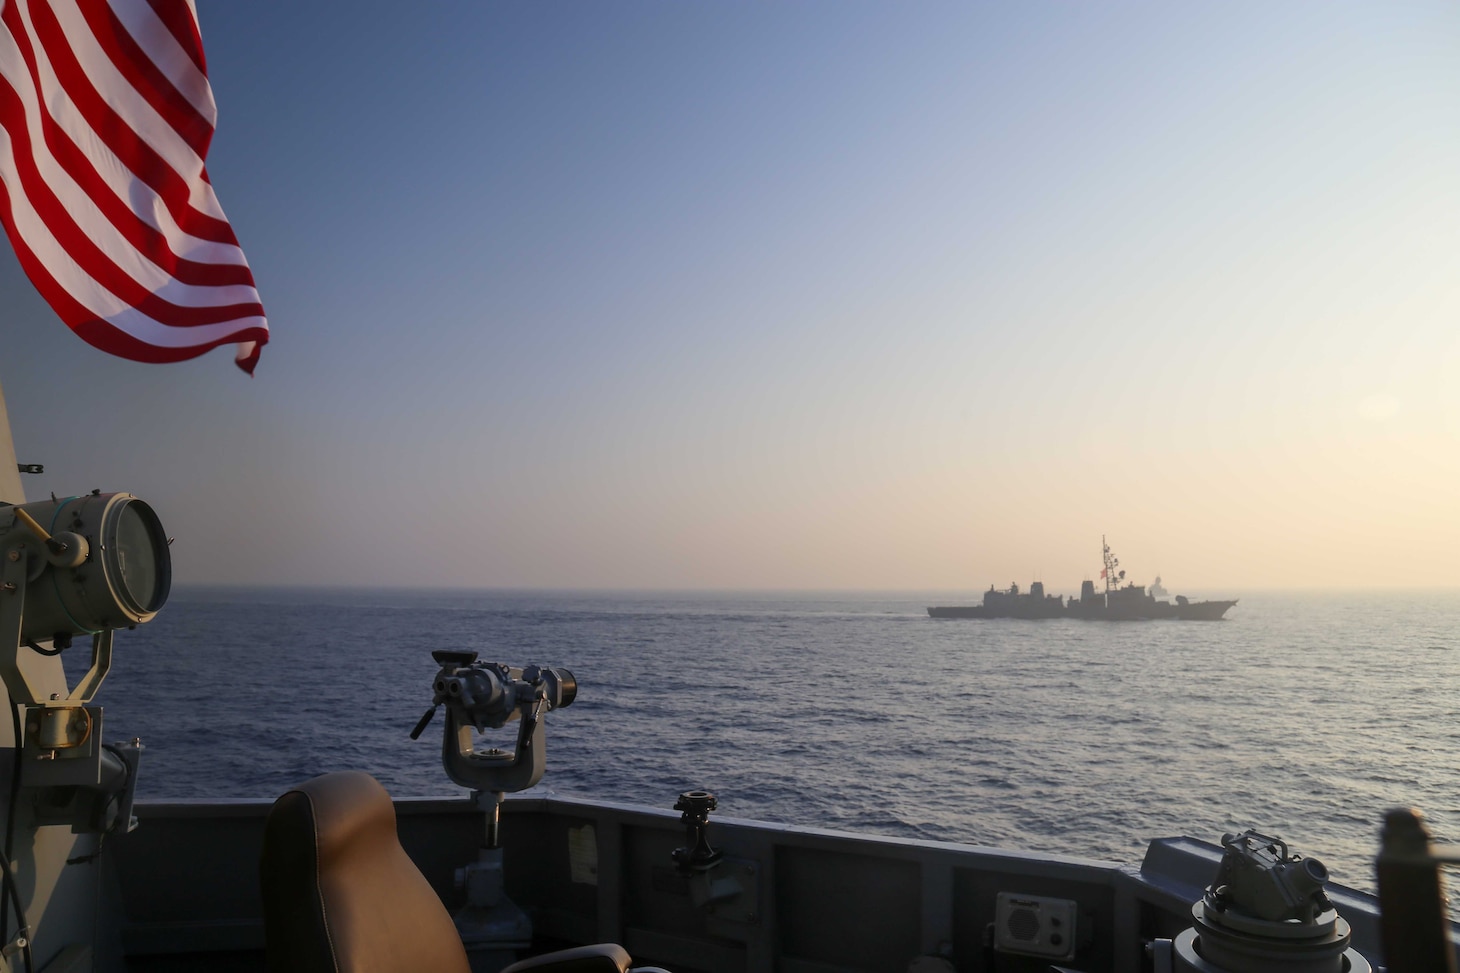 BAY OF BENGAL (Feb. 17, 2024) The Arleigh Burke-class guided-missile destroyer USS Halsey (DDG 97), sails with the Japan Maritime Self-Defense Force Takanami-class destroyer JS Sazanami (DD 113) and Royal Australian Navy Anzac-class frigate HMAS Warramunga (FFH 152) during trilateral operations in the Bay of Bengal, Feb. 17-18. U.S. 7th Fleet is the U.S. Navy’s largest forward-deployed numbered fleet, and routinely interacts and operates with allies and partners in preserving a free and open Indo-Pacific region. (U.S. Navy photo by Mass Communication Specialist 3rd Class Ismael Martinez)